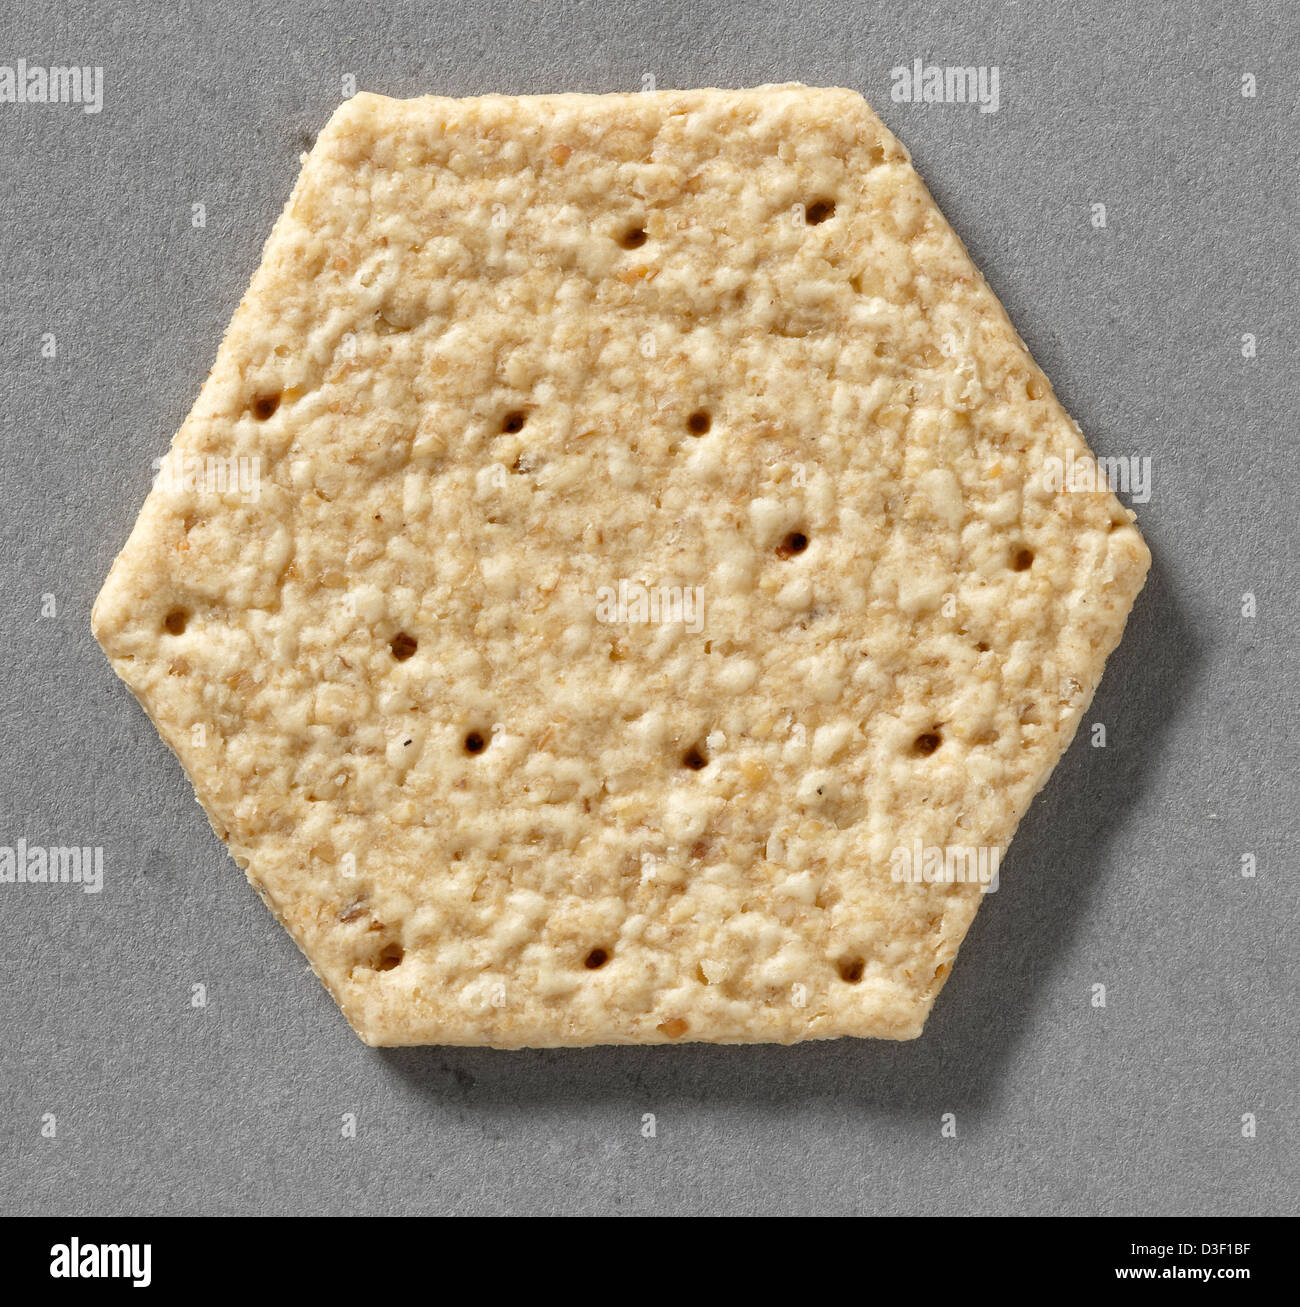 Hexagonal baked savory biscuit for cheese Stock Photo